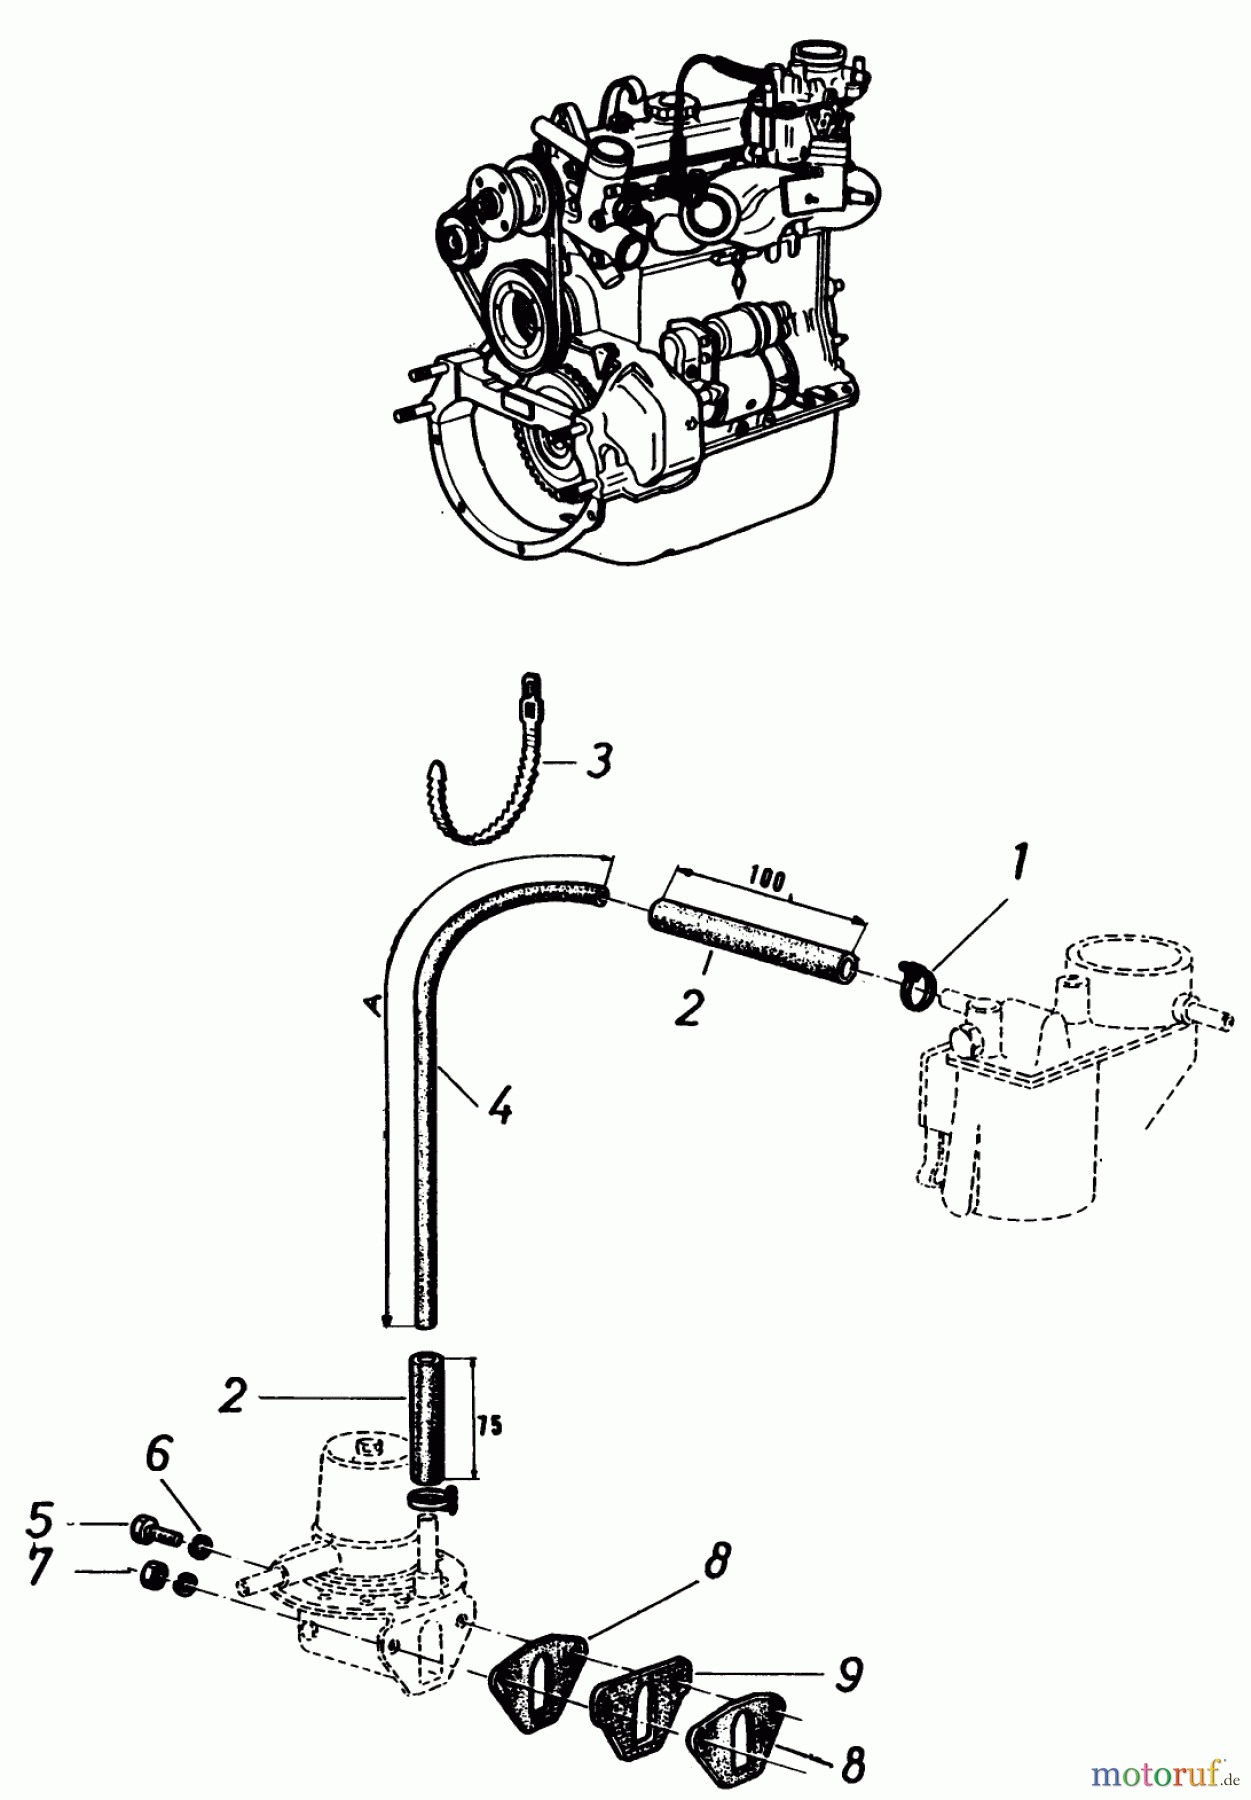  Toro Neu Mowers, Lawn & Garden Tractor Seite 2 81-20RG01 (D-250) - Toro D-250 10-Speed Tractor, 1978 ENGINE FUEL LINES AND FUEL PUMP MOUNTING HARDWARE